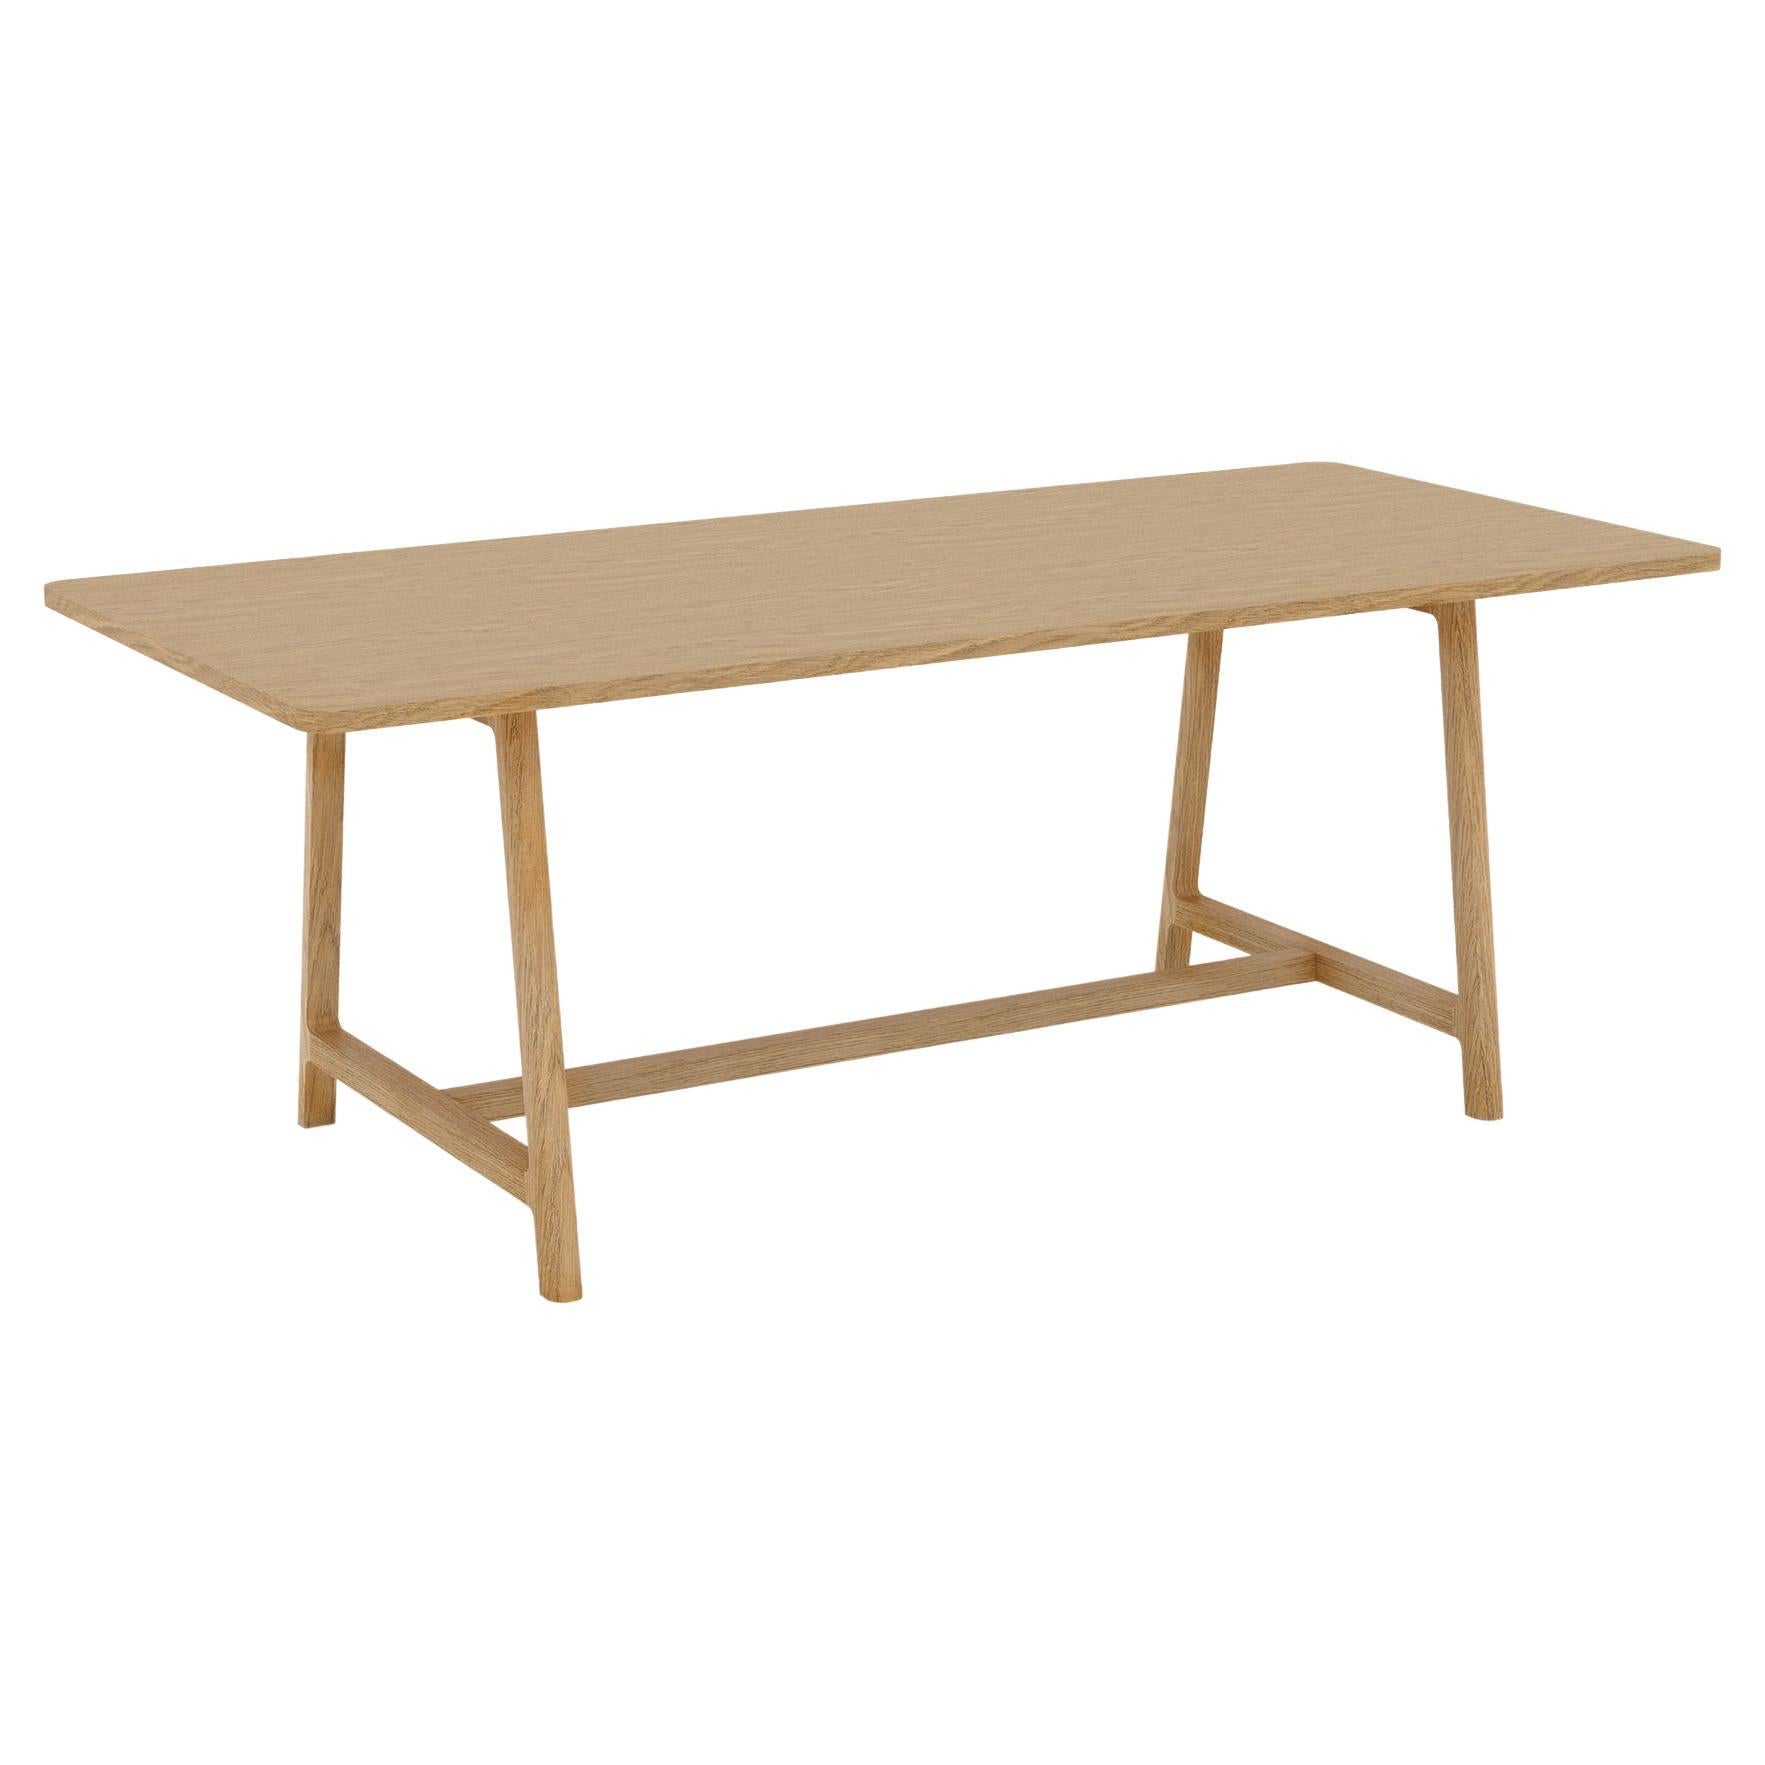 Minimalist Modern Table in Oak Wood FRAME Collection For Sale